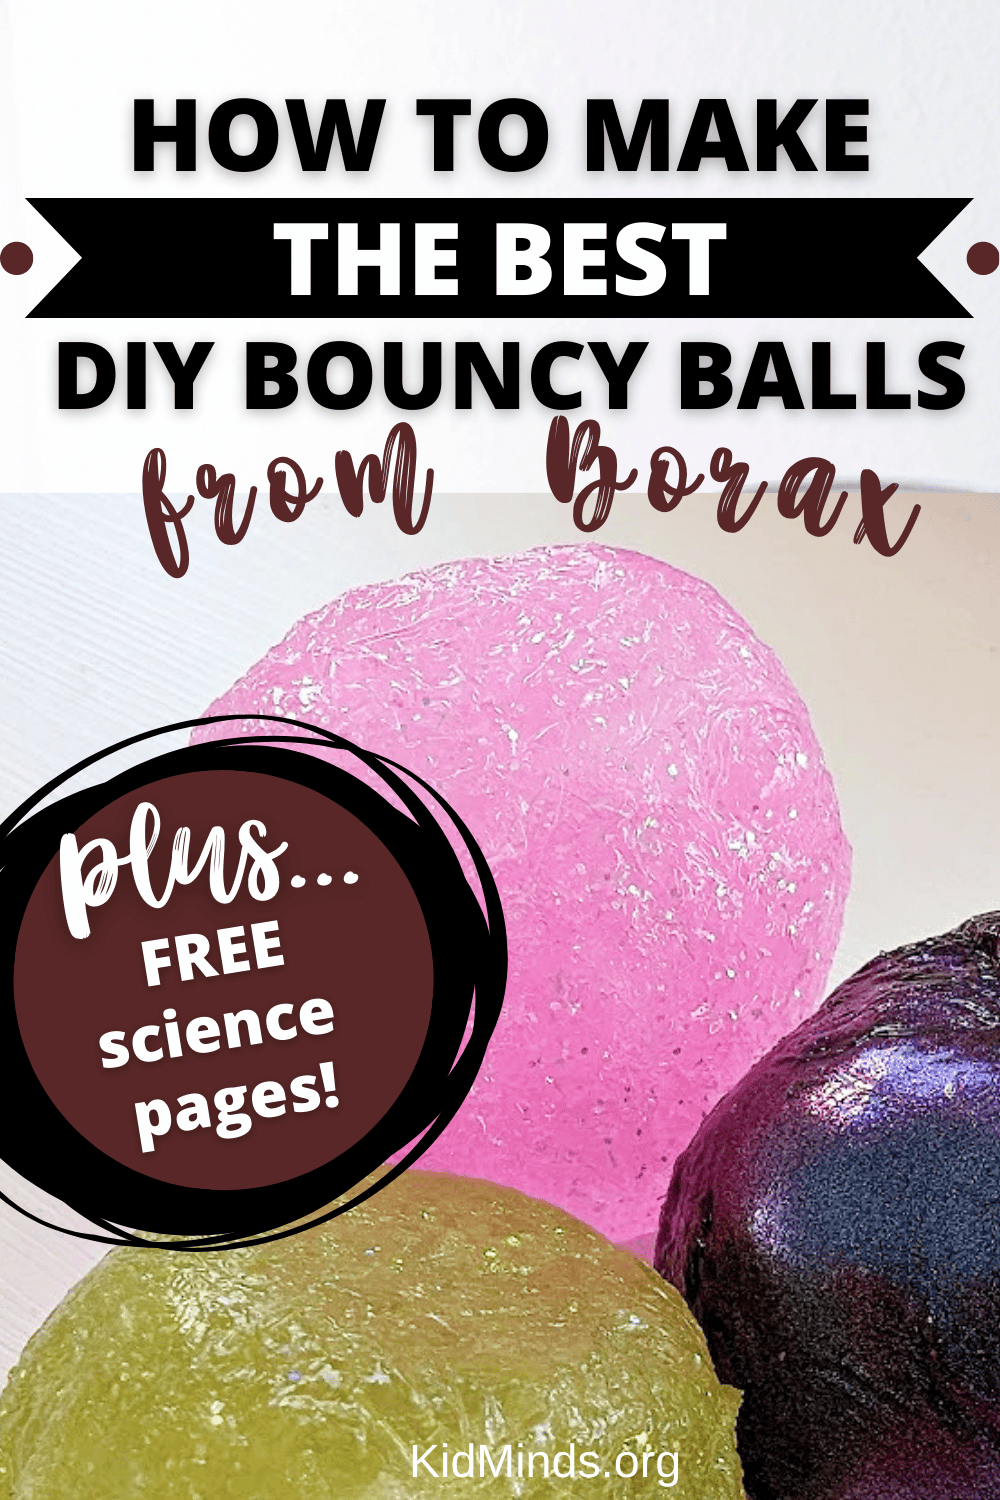 Kids love to play! Making your own bouncy balls (from Borax) is the perfect way to combine play and learning. Plus, these balls are a blast for the whole family. #kidsactivities #laughingkidslearn #earlyeducation #handsonlearning #kidminds #creativekids #borax